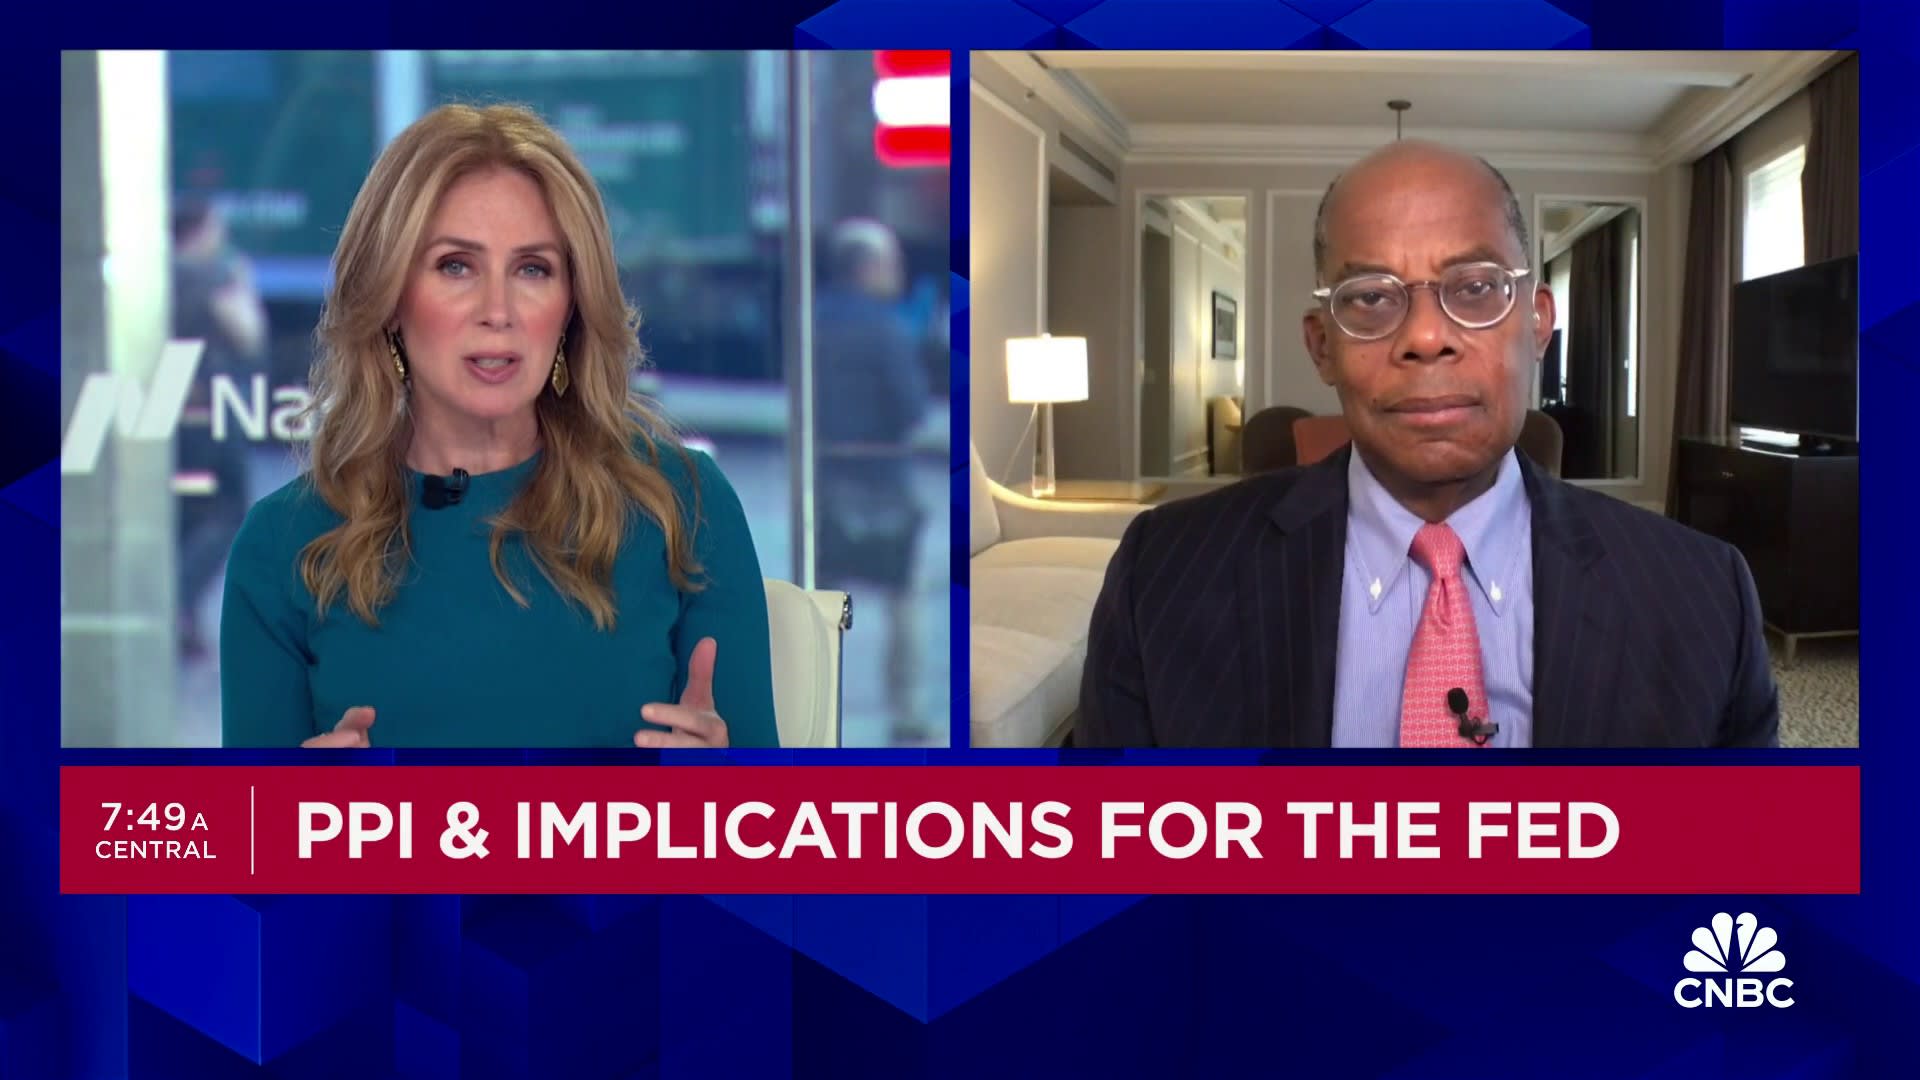 The economy has performed reasonably well against restrictive Fed policy, says Roger Ferguson